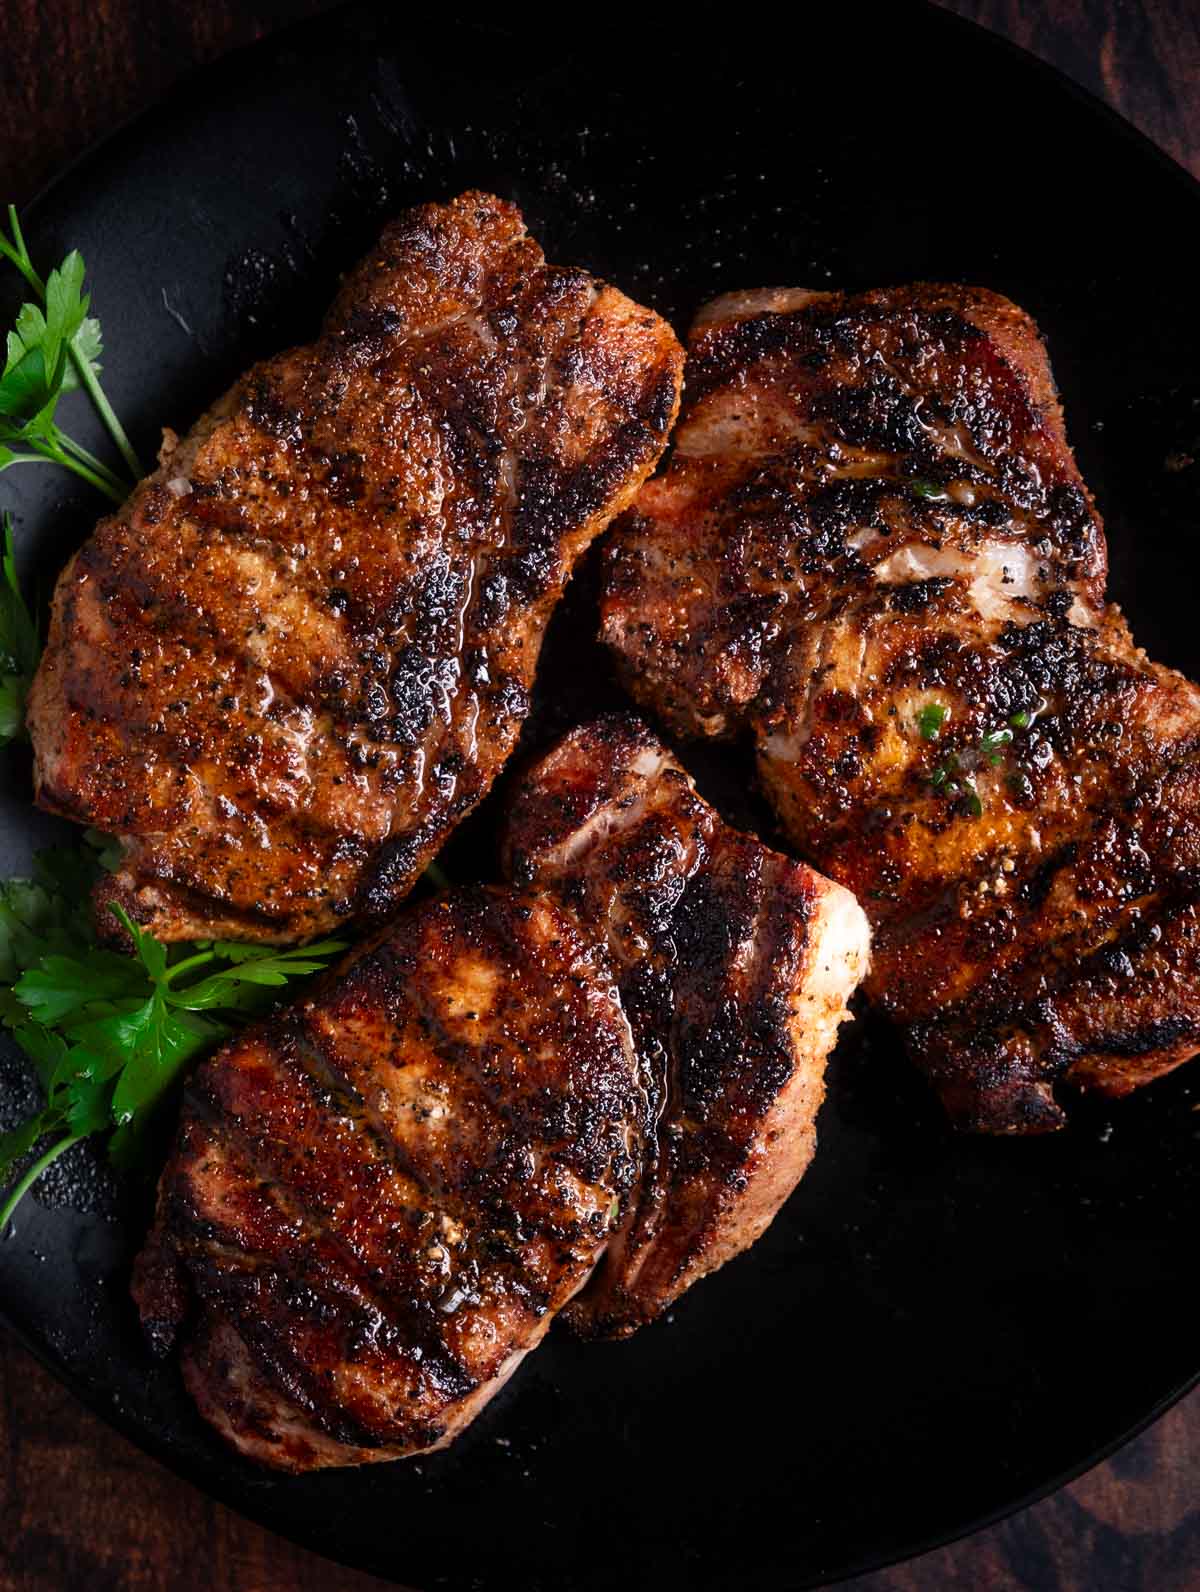 grilled pork chops resting on a plate